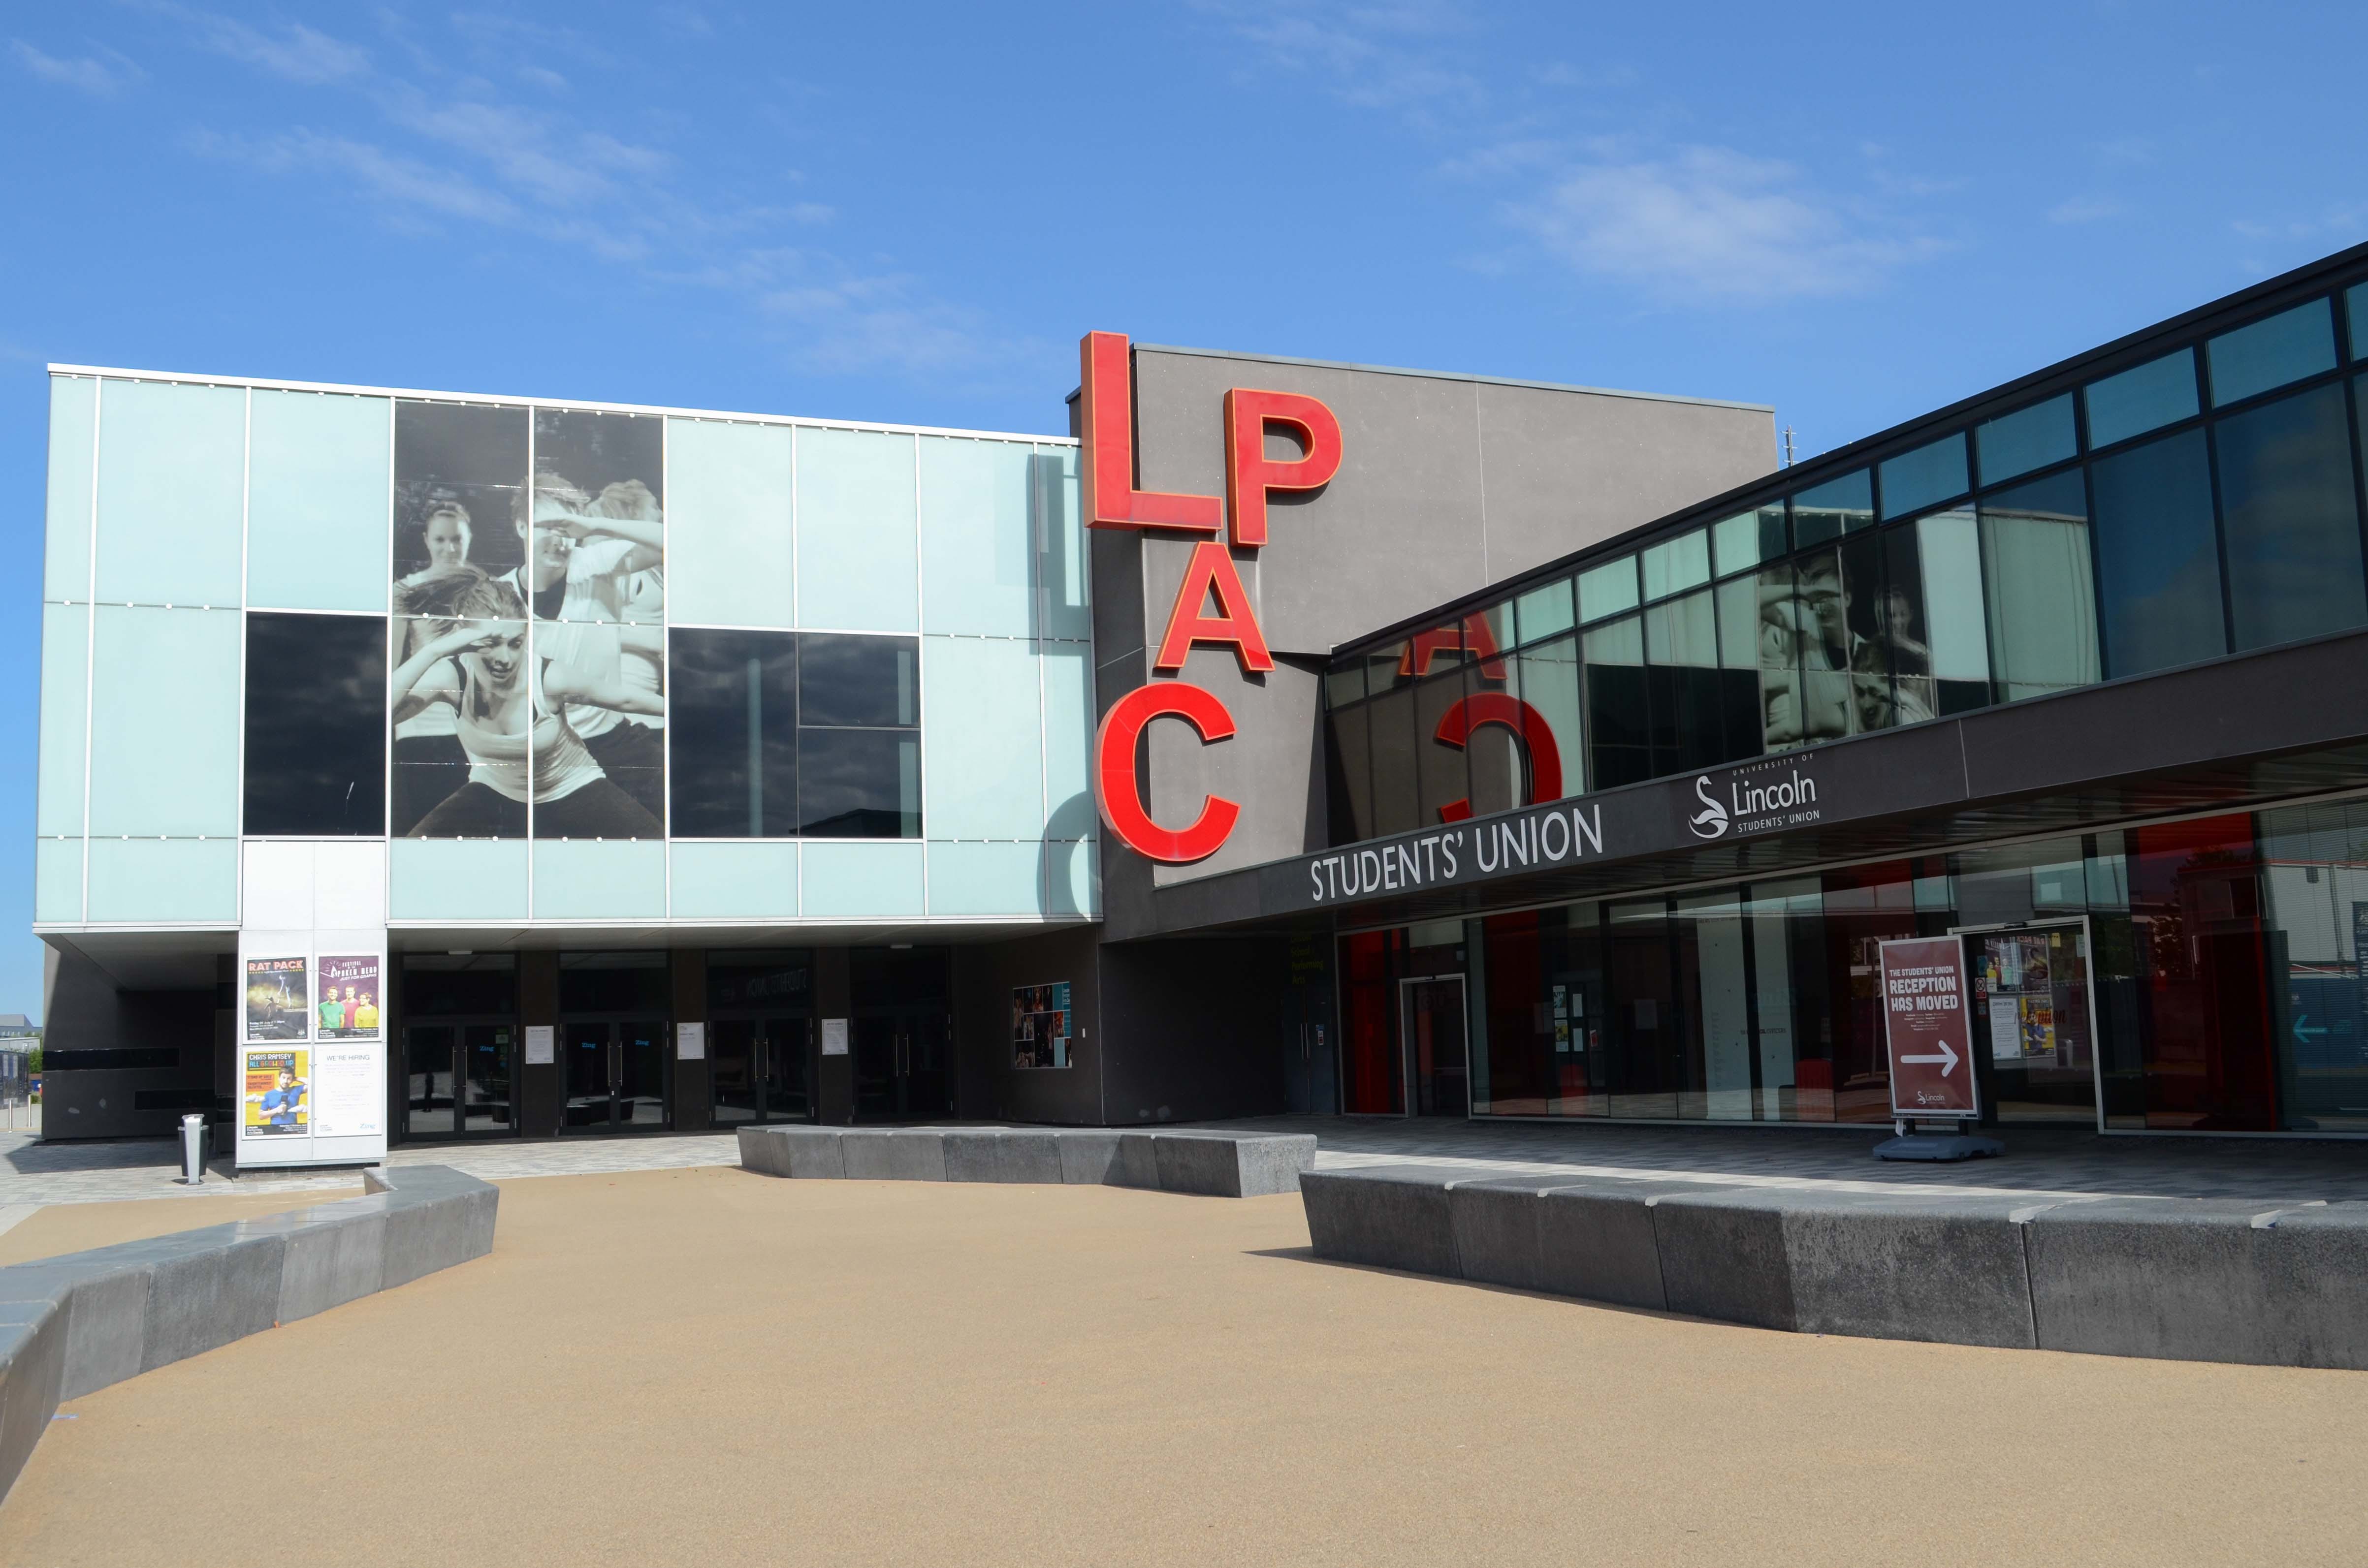 Image of a theatre, a large light blue and grey building with "LPAC" signage in red